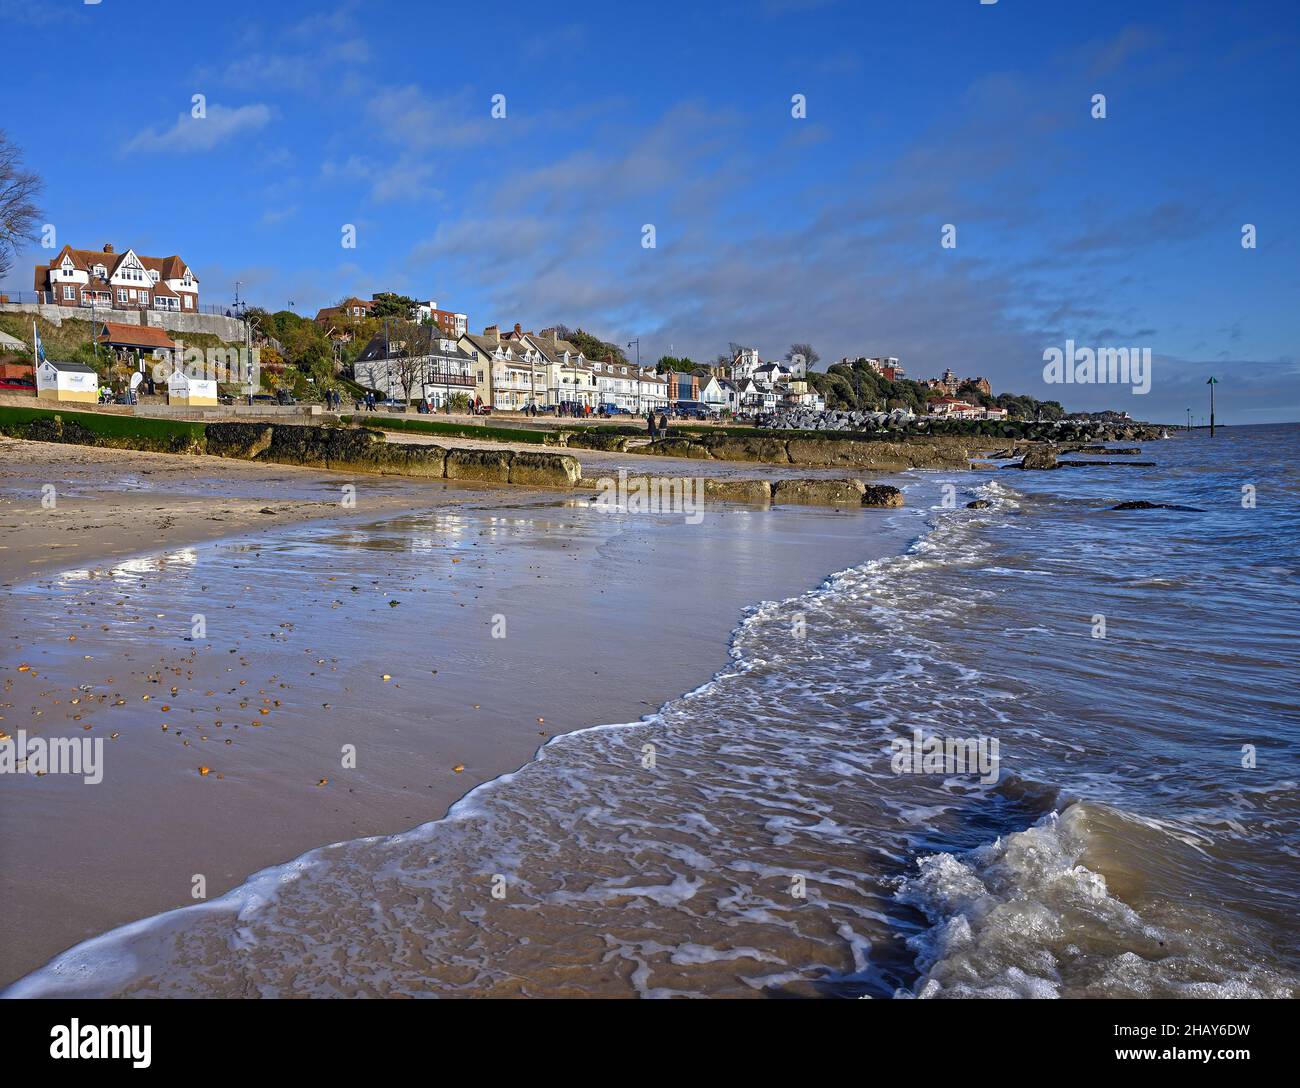 Felixstowe, Suffolk, UK: Waves lap against the sandy beach in the English resort town of Felixstowe. People walk along the promenade and beach. Stock Photo